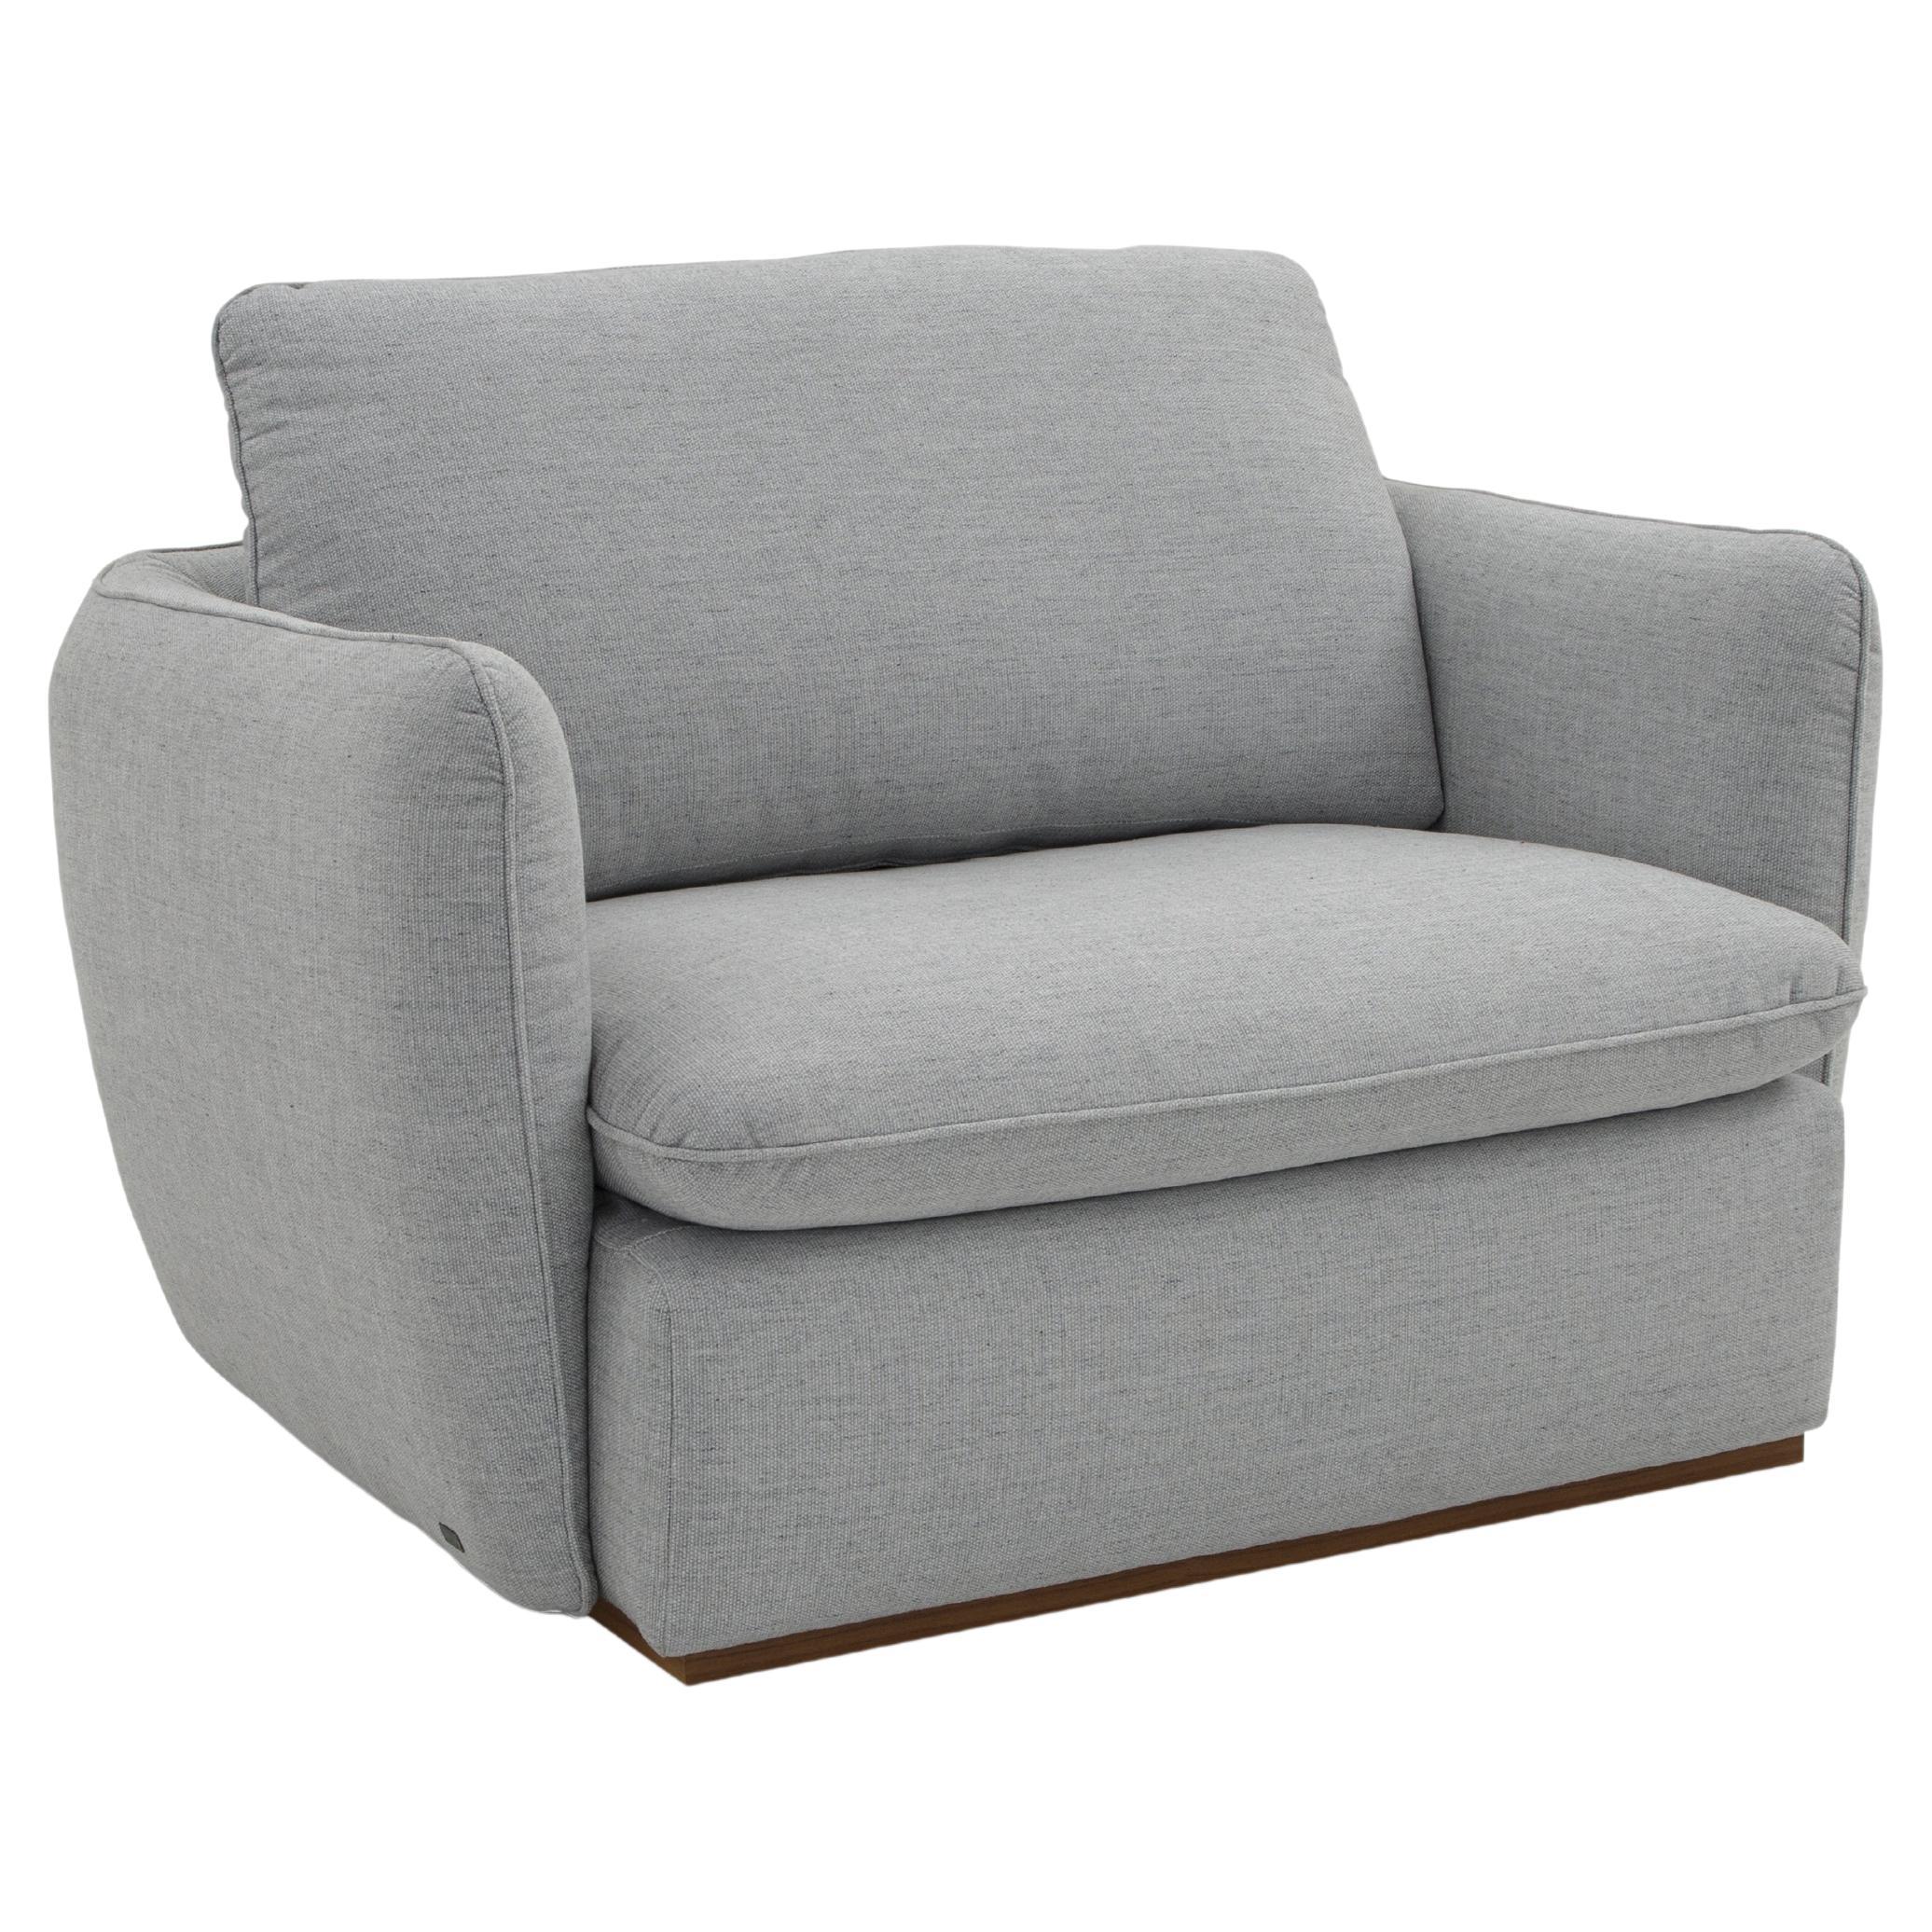 Kolo Armchair Upholstered in Light Gray Fabric For Sale